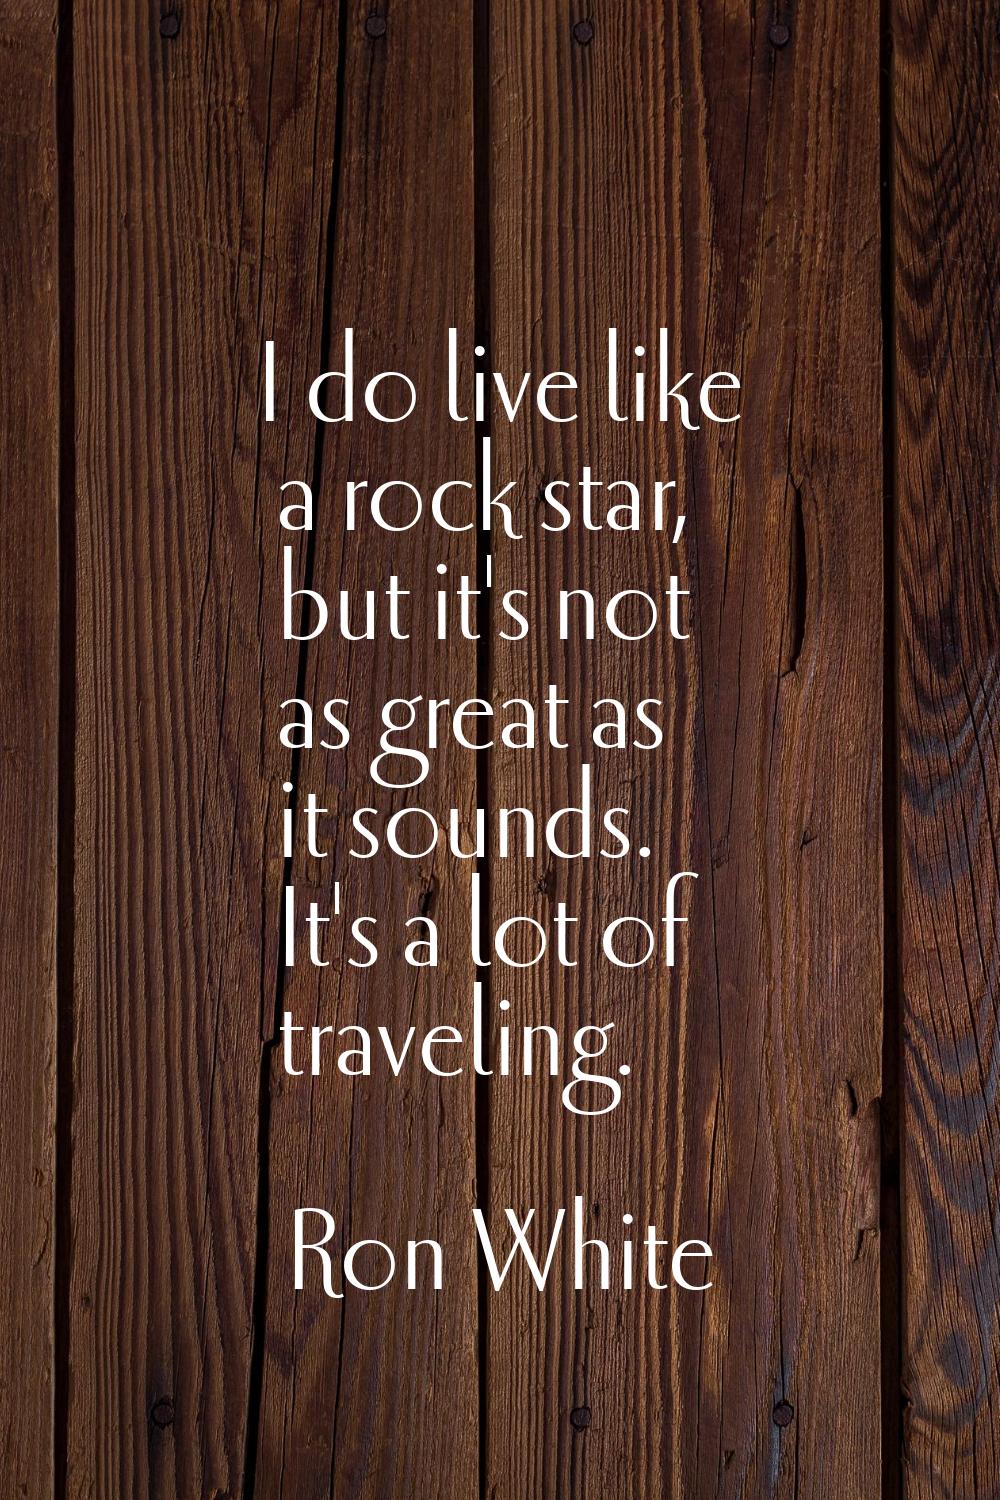 I do live like a rock star, but it's not as great as it sounds. It's a lot of traveling.